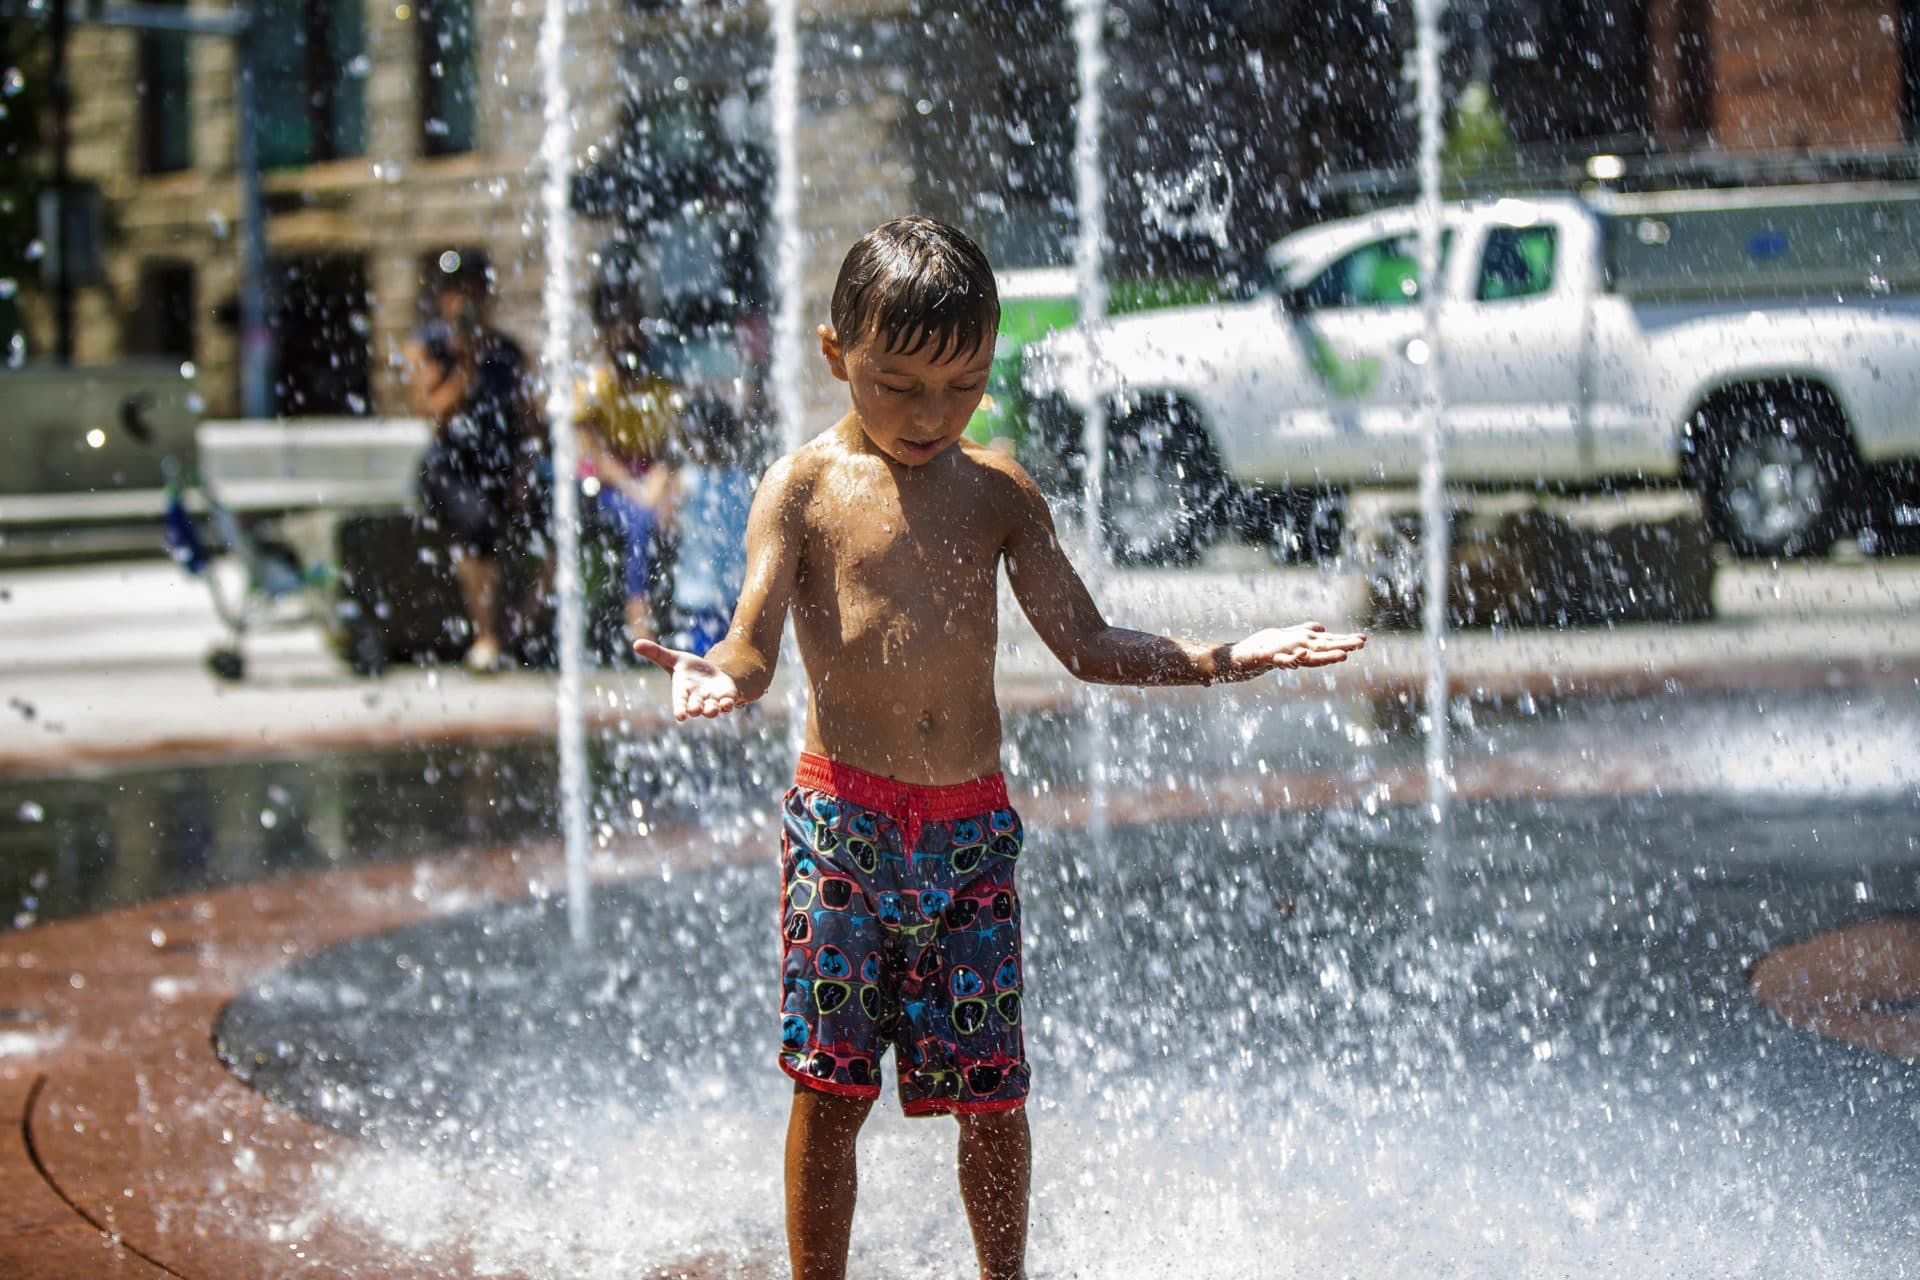 A young boy cools off in the water streams at the Rings Fountain at the Rose Kennedy Greenway. (Jesse Costa/WBUR)